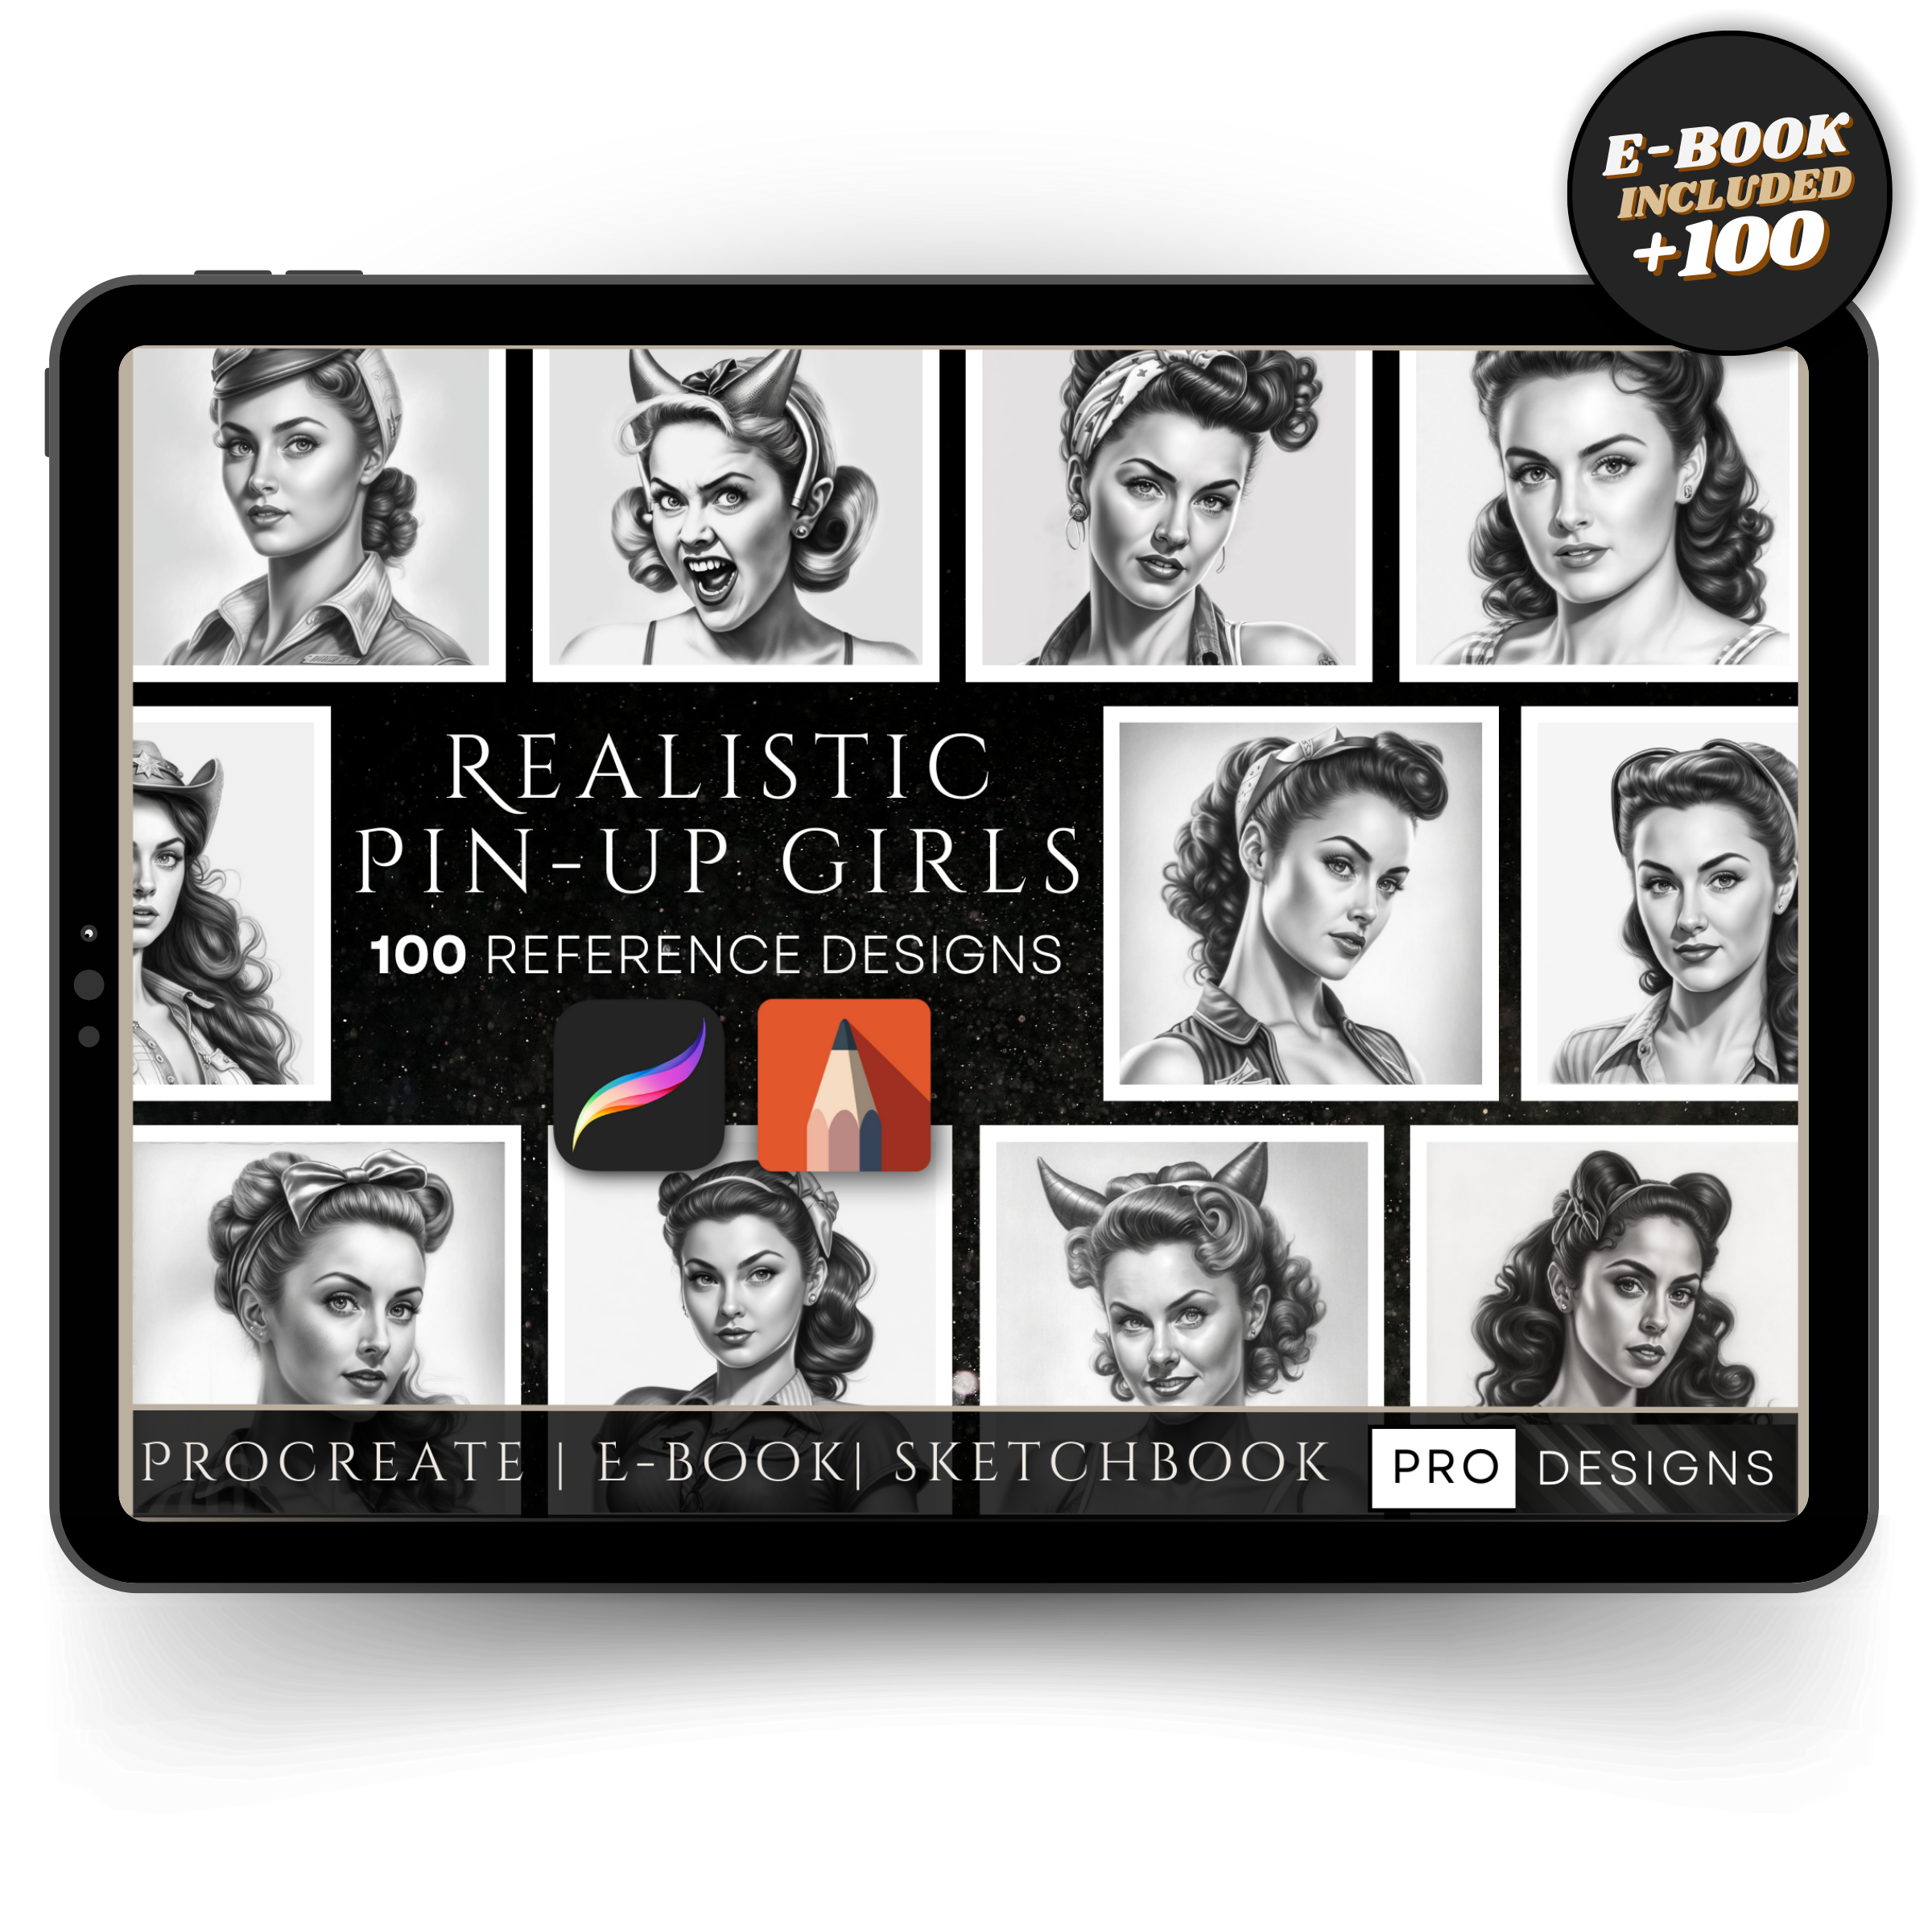 "Retro Allure" - The Realistic Pin-Up Girls Collection